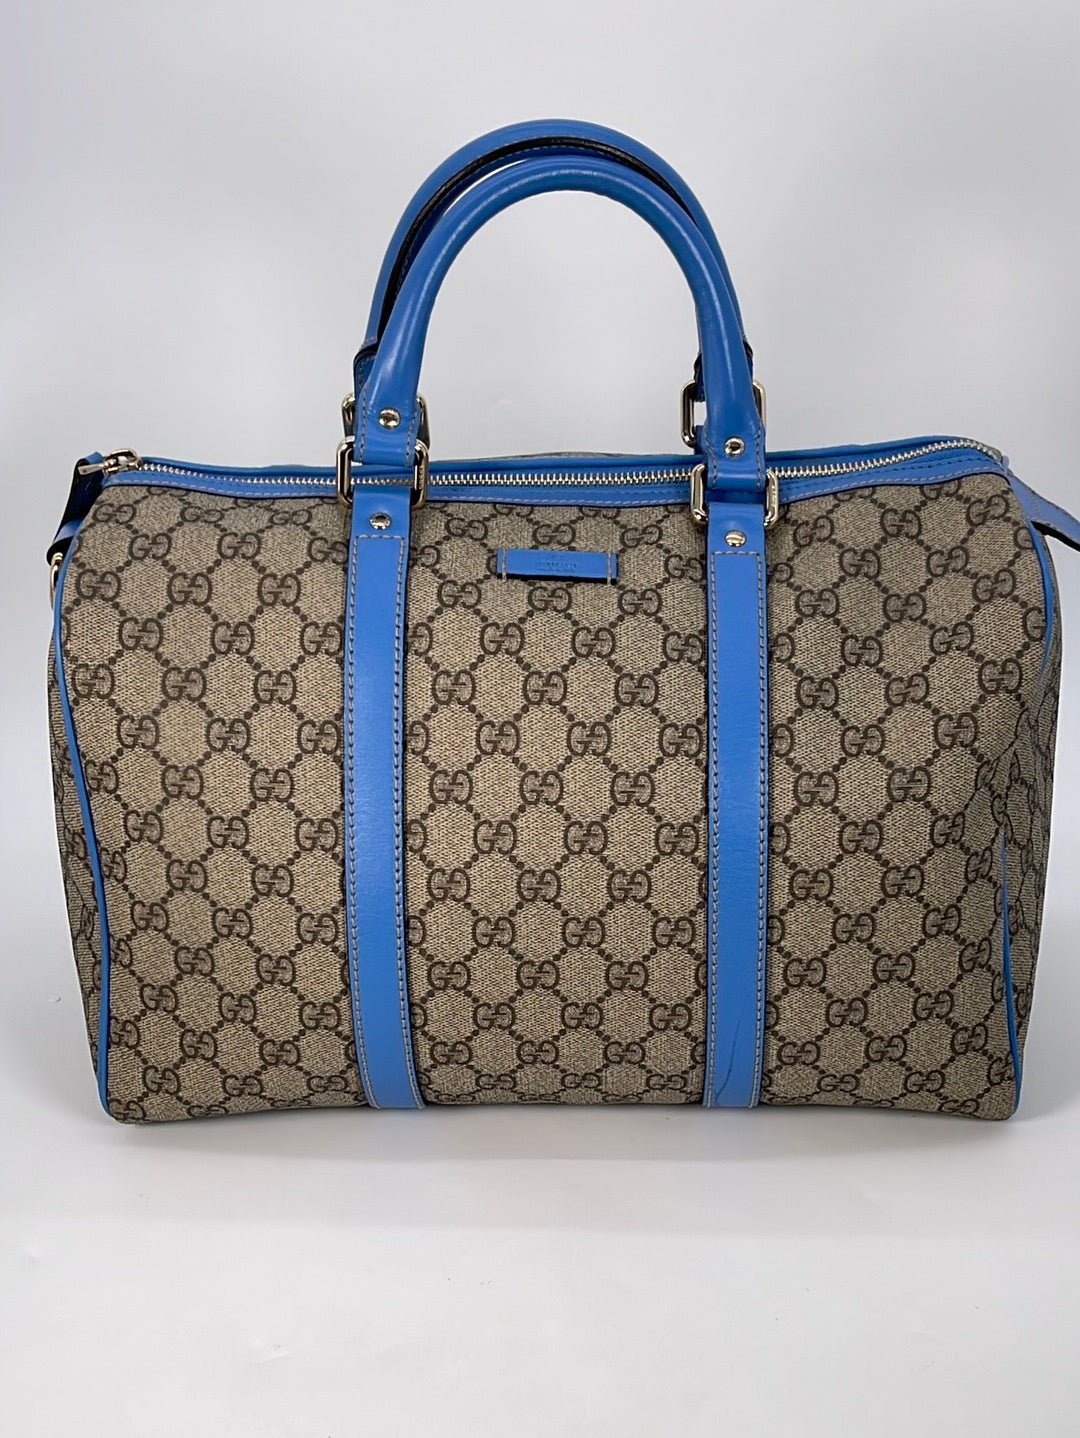 Sold at Auction: Gucci Vintage GG Supreme Canvas Small Boston Bag